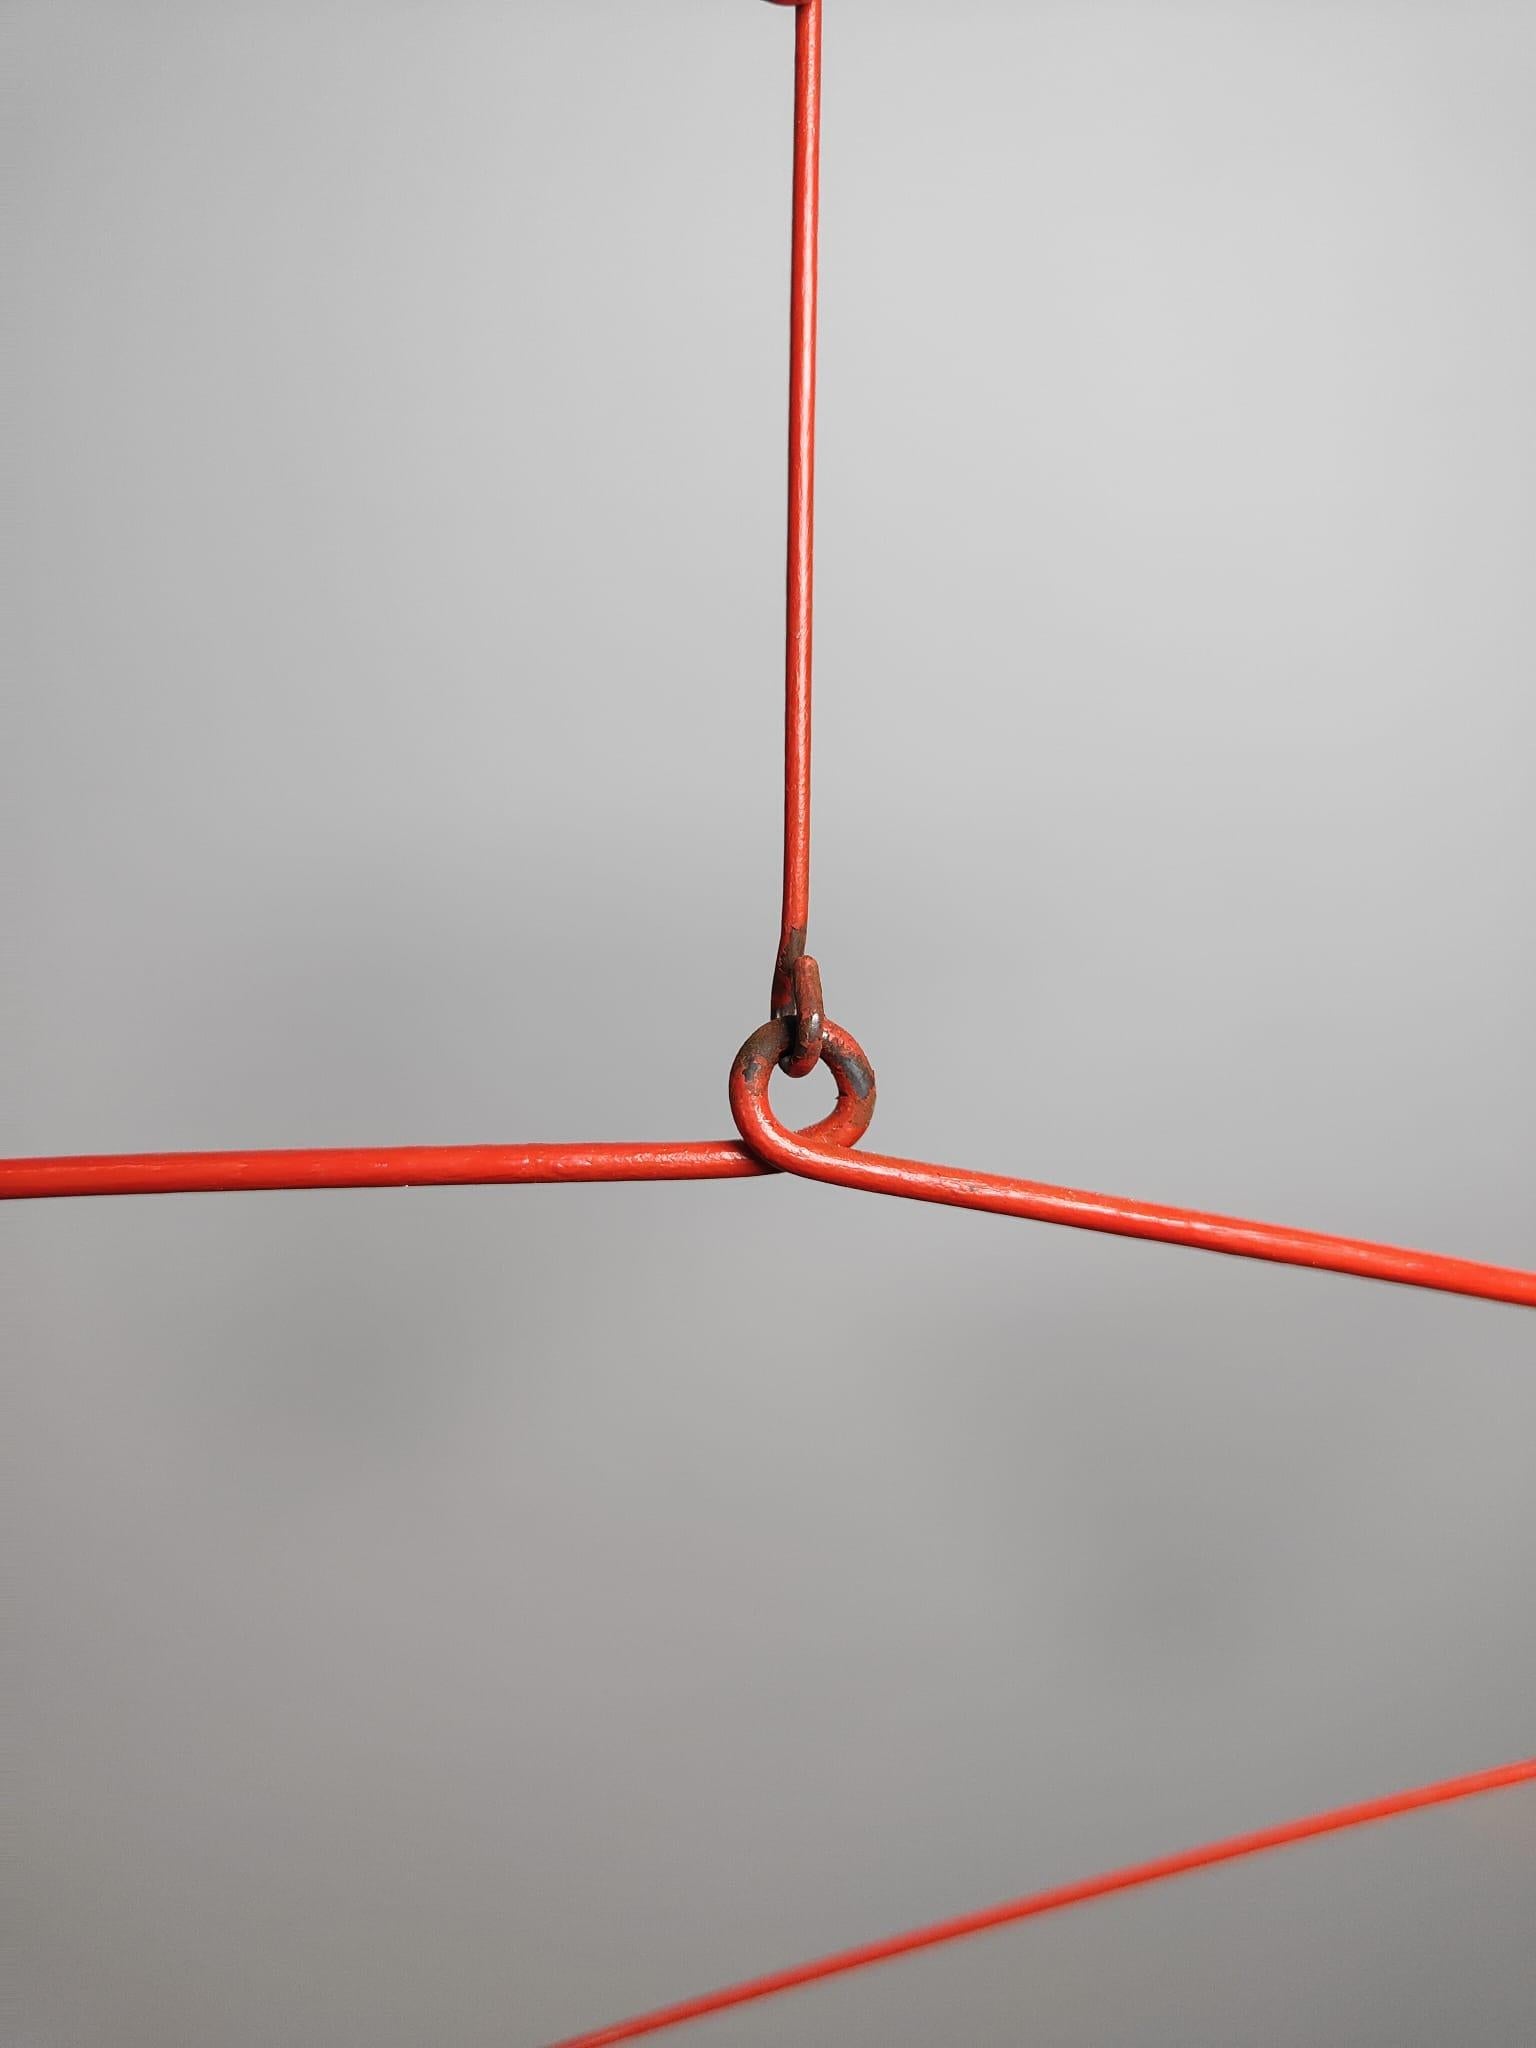 In the manner of Alexander Calder hanging mobile sculpture - sheet metal, wire and paint.
Dimensions: (160 x 126 cm).
Provenance: Private collection